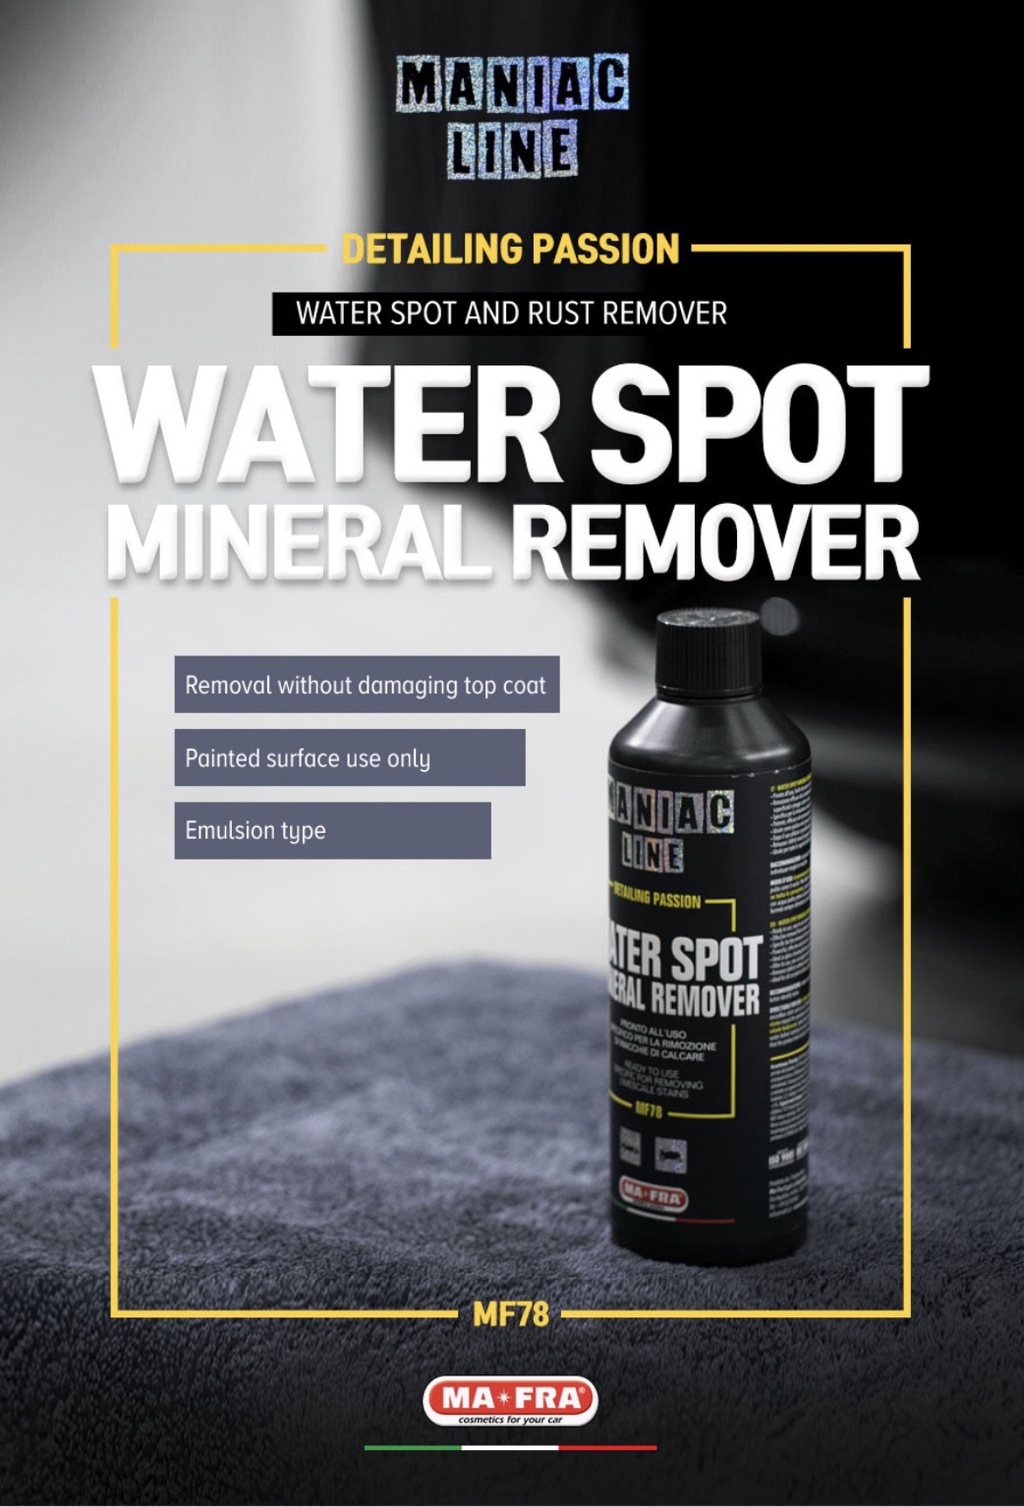 Maniac Line Water Spot Mineral Remover | Morice Shop